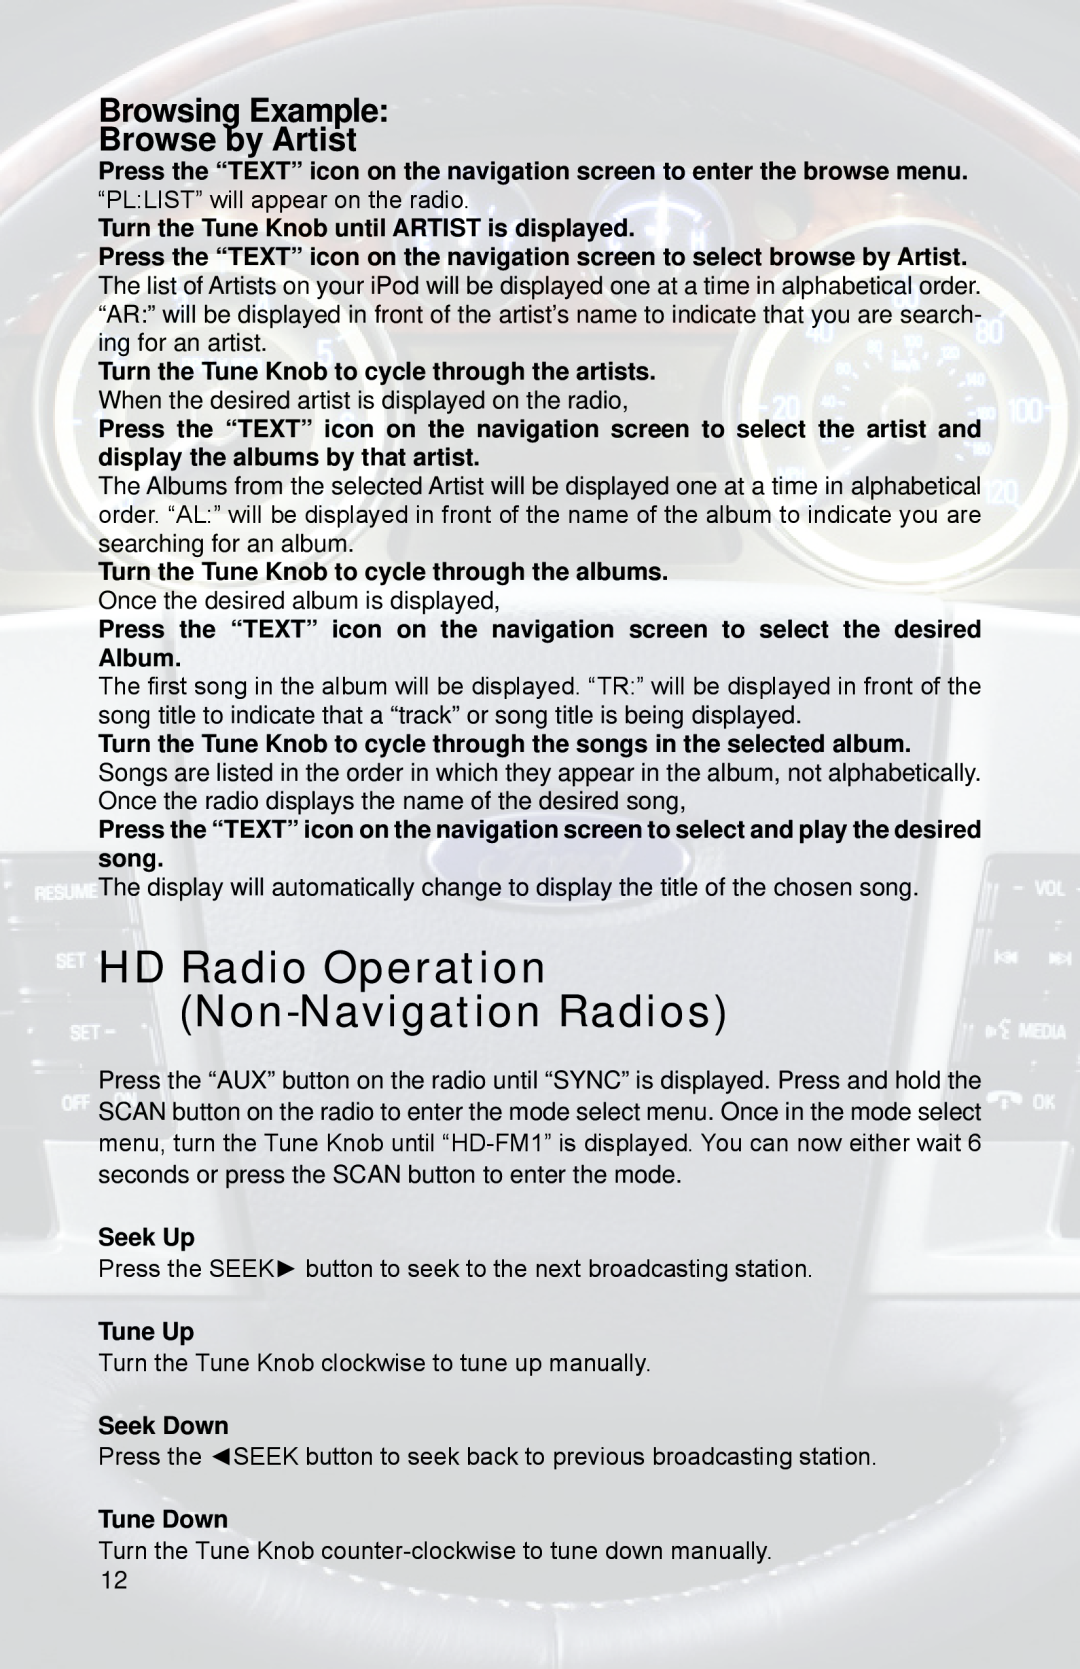 iSimple PGHFD1 owner manual HD Radio Operation Non-NavigationRadios, Browsing Example Browse by Artist 